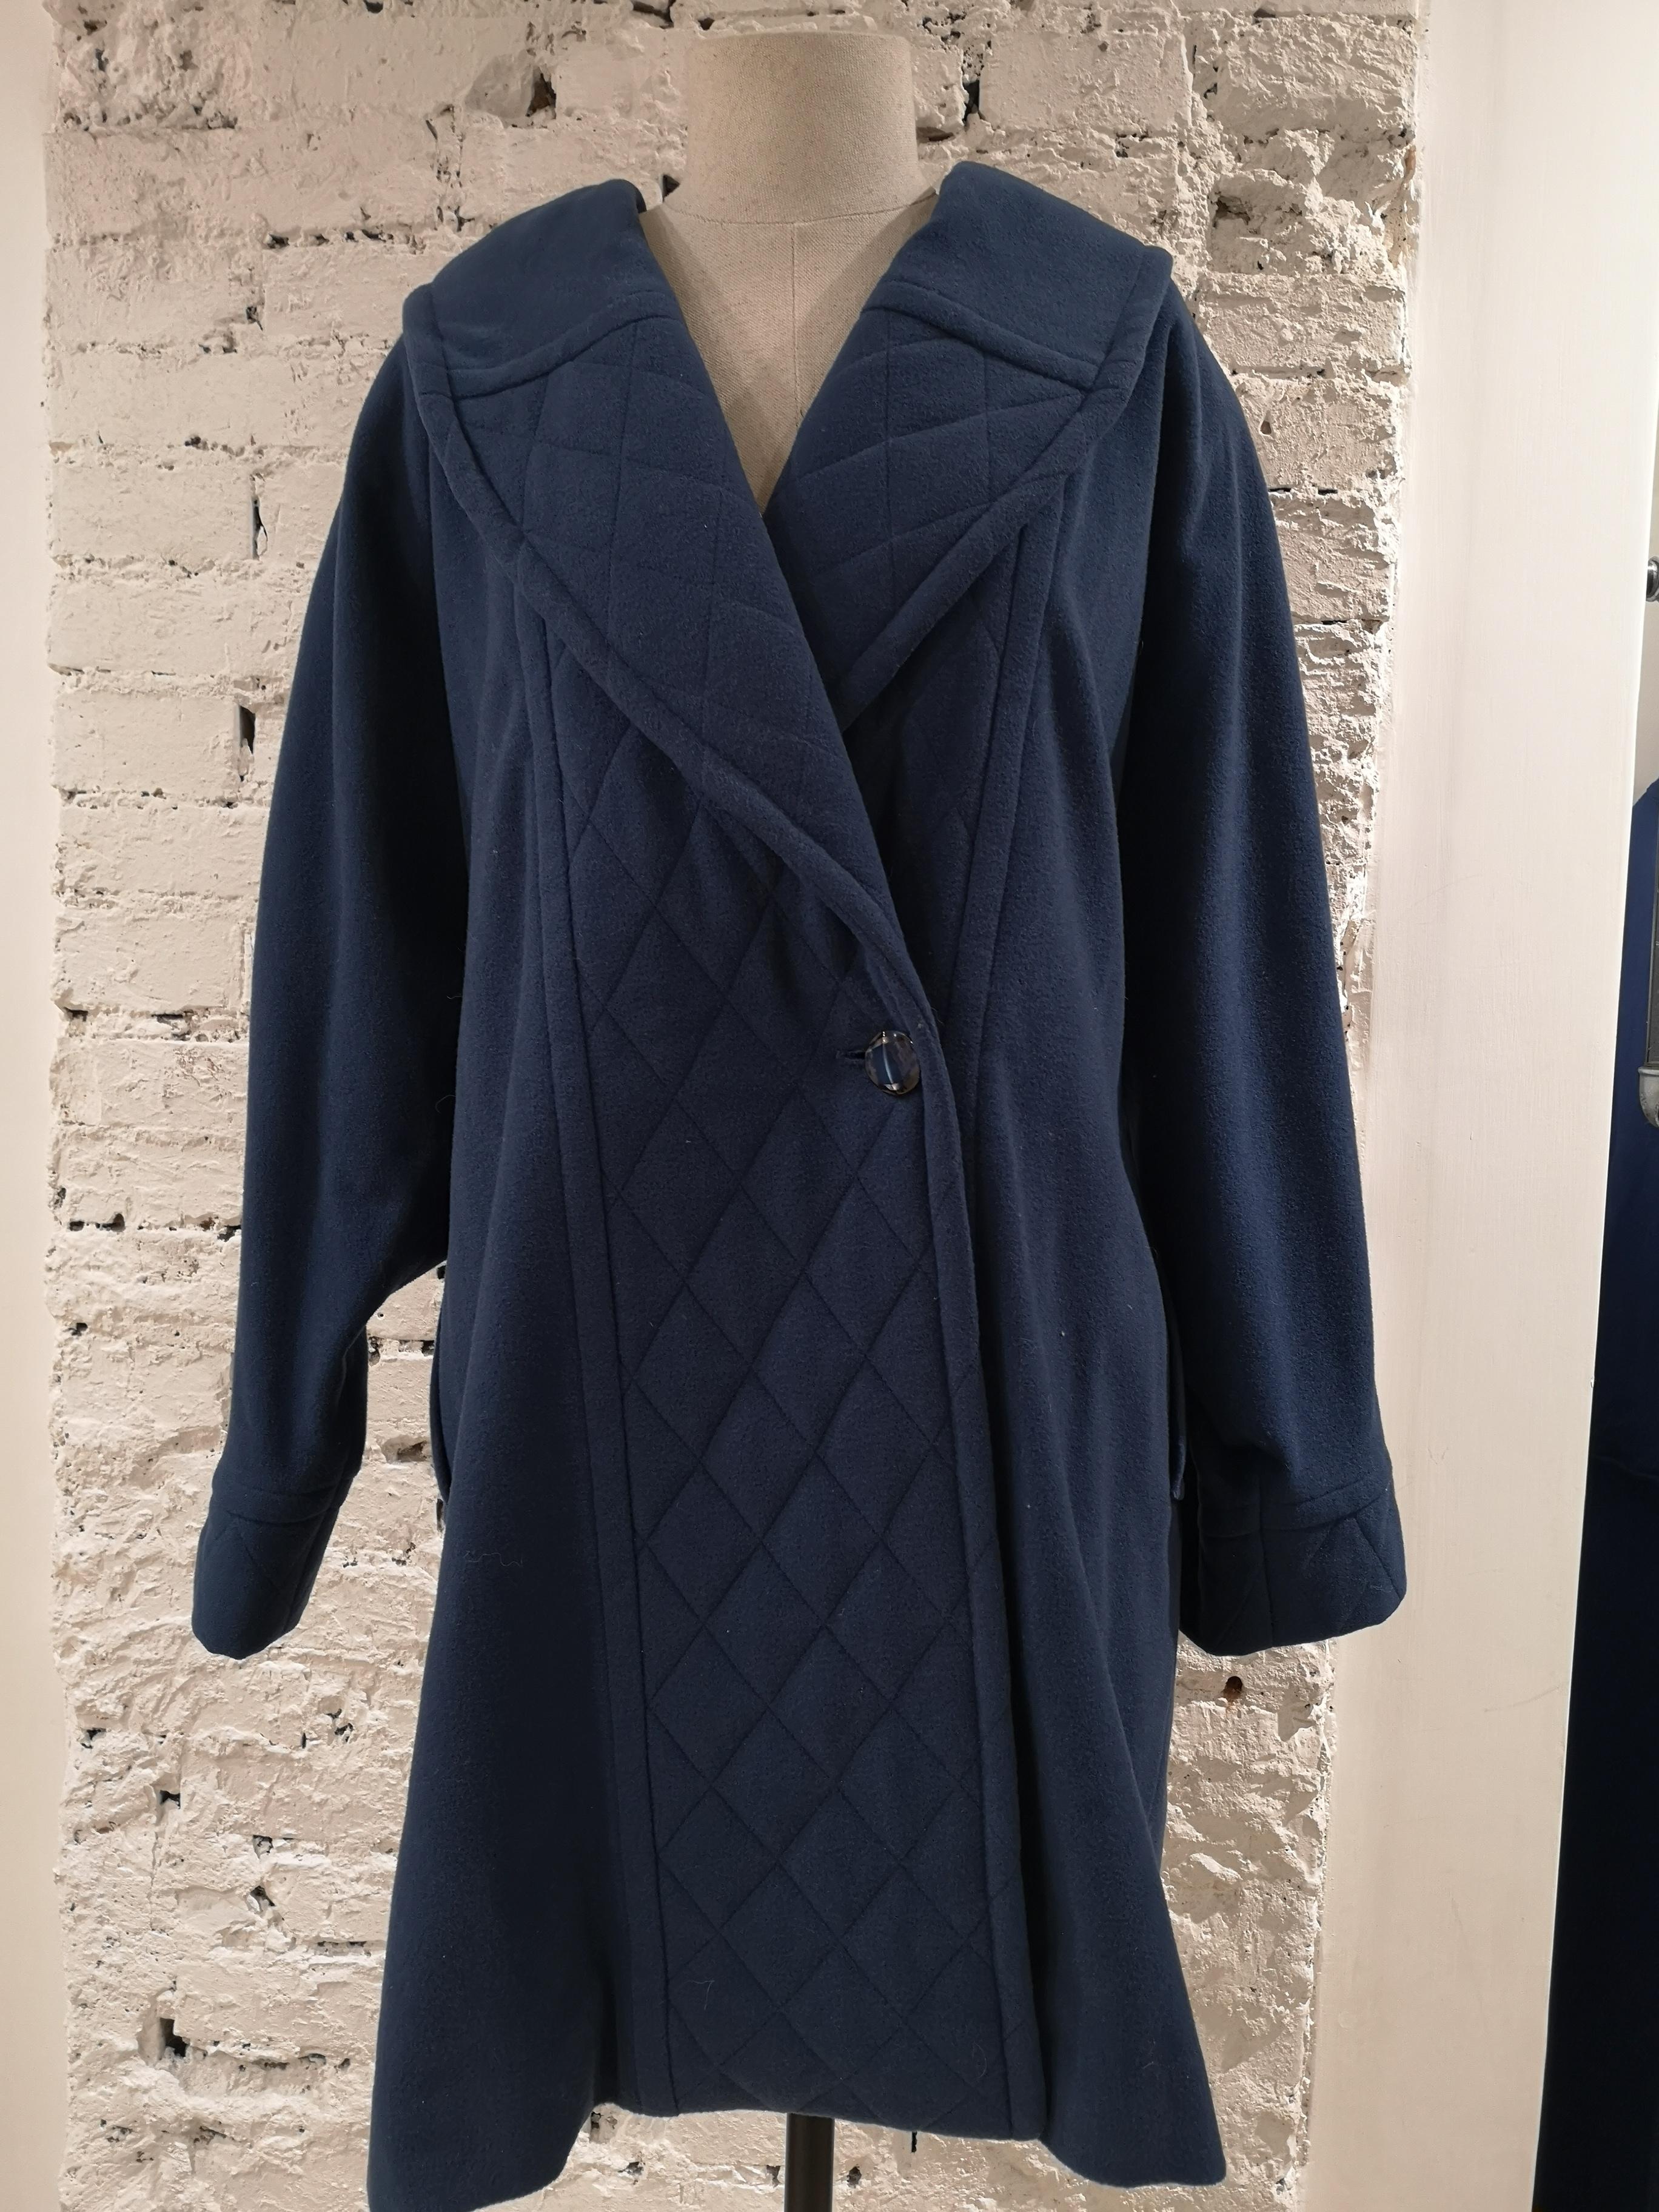 Louis Feraud blue wool coat totally made in italy in size 42 fr 